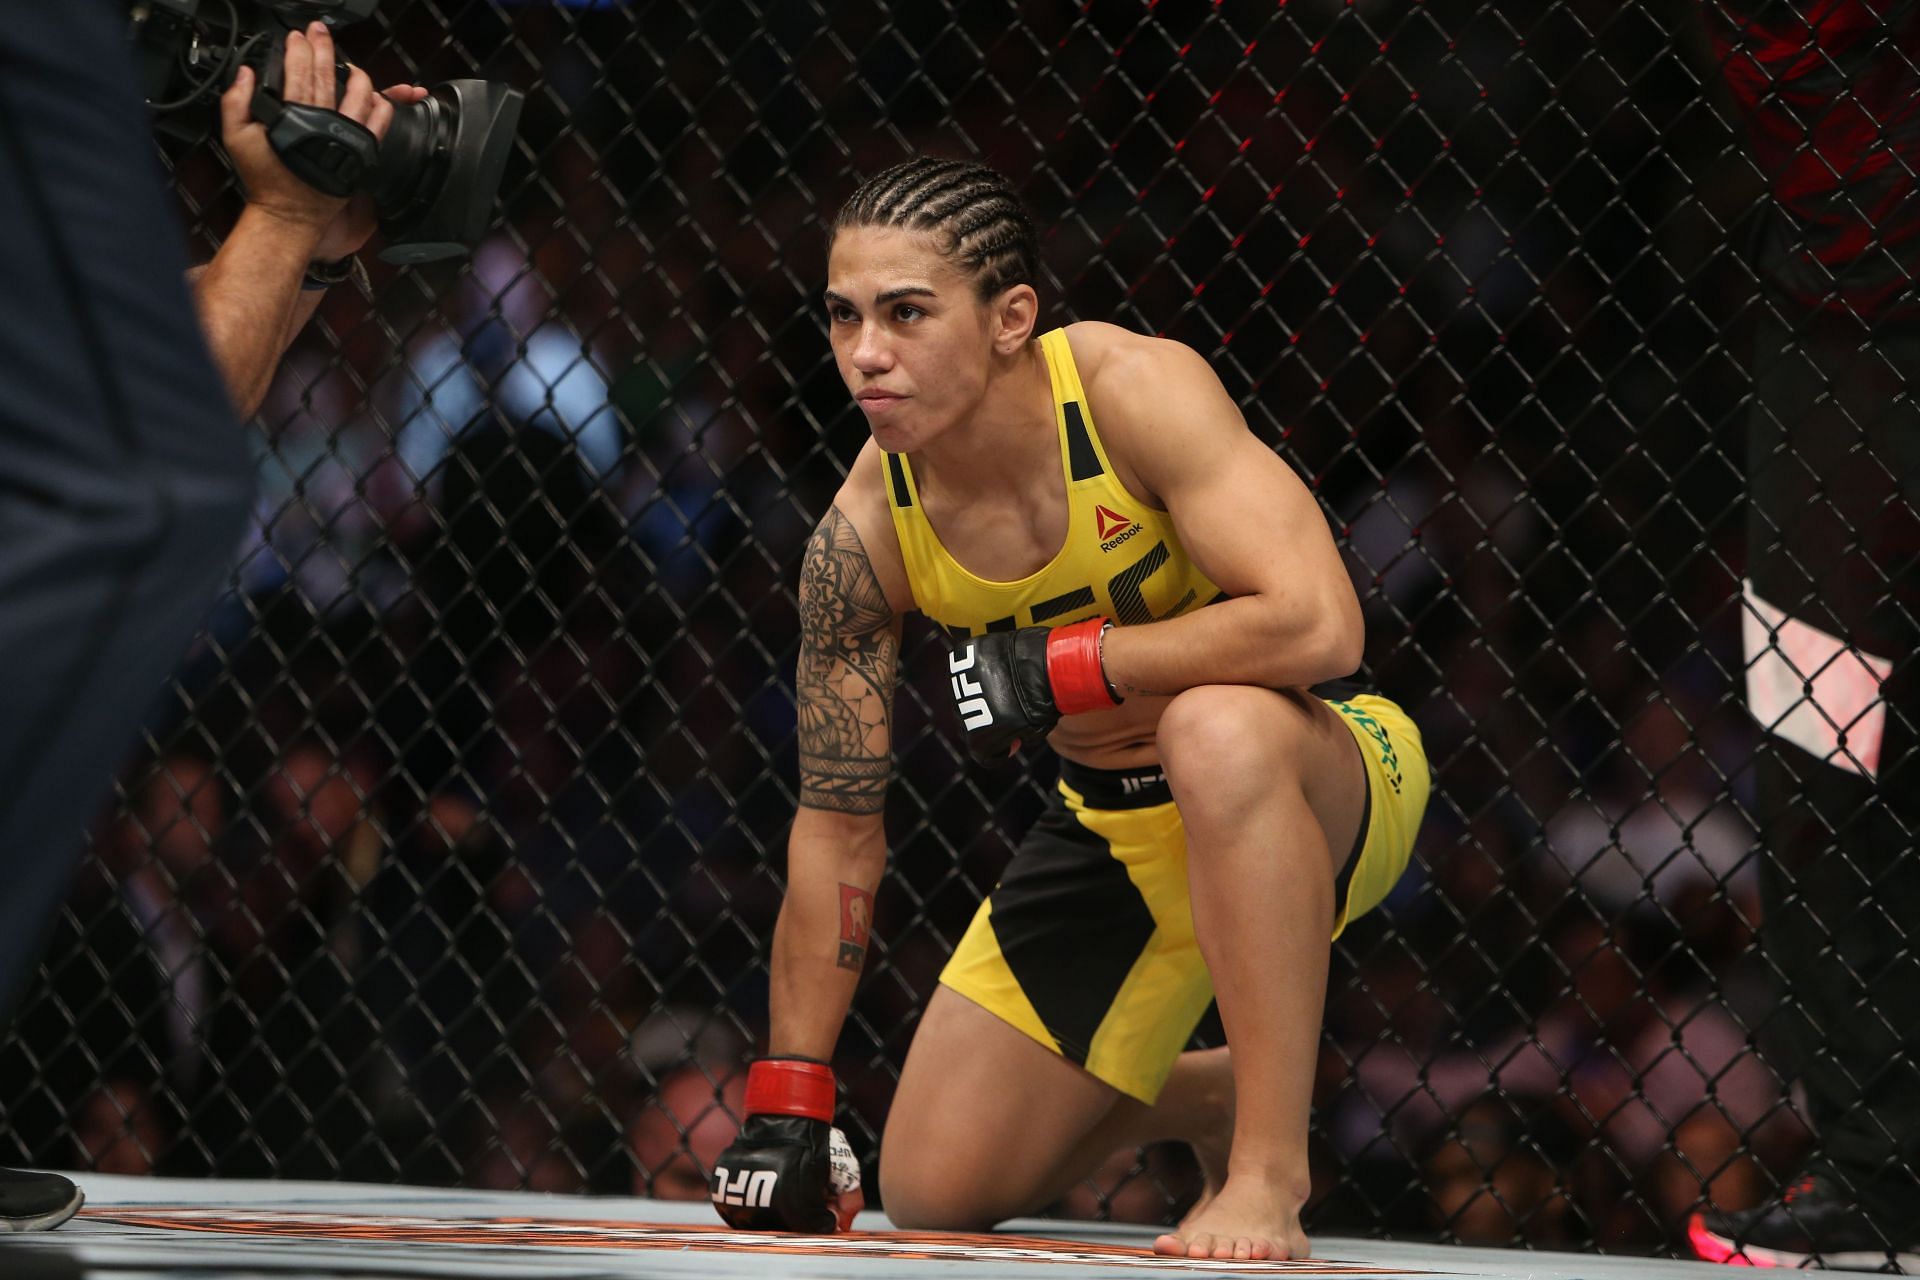 Jessica Andrade first won the championship on May 11 2019